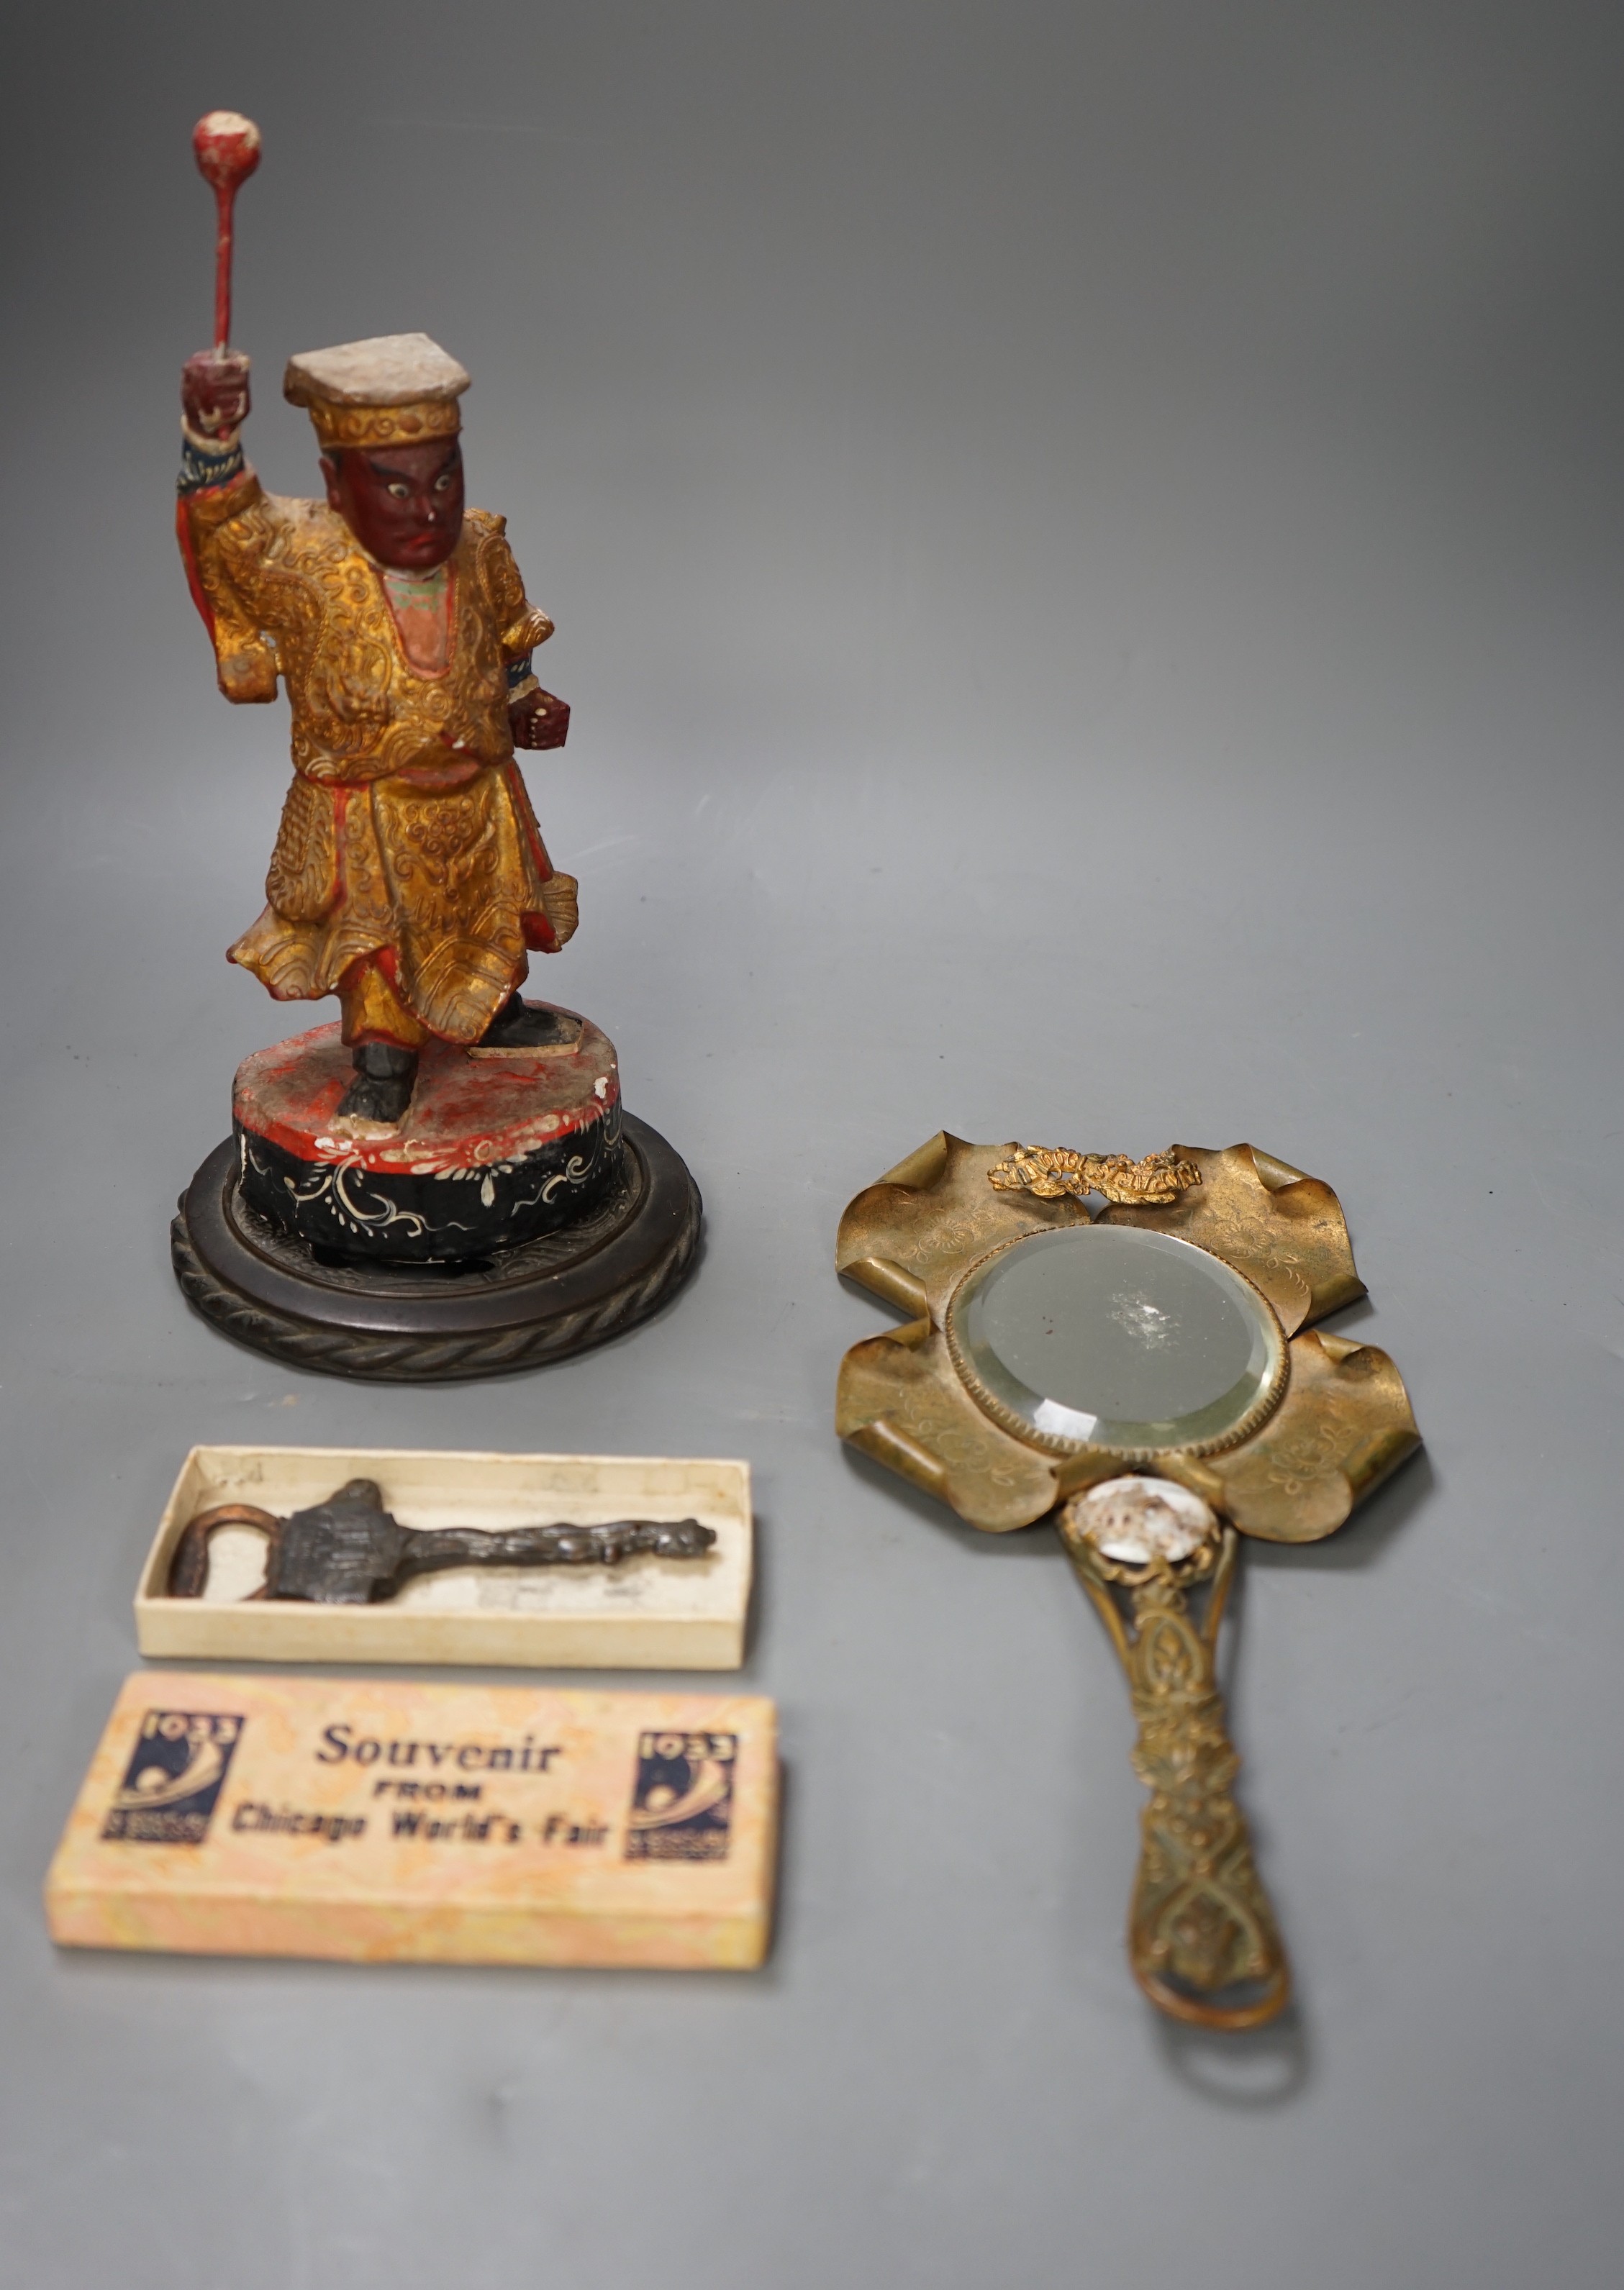 An Oriental carved painted wooden figure, together with an early 20th century 'Chicago World Fair' bottle opener souvenir, and a 1900 Paris exposition mirror with floral and scroll motif (3)                              